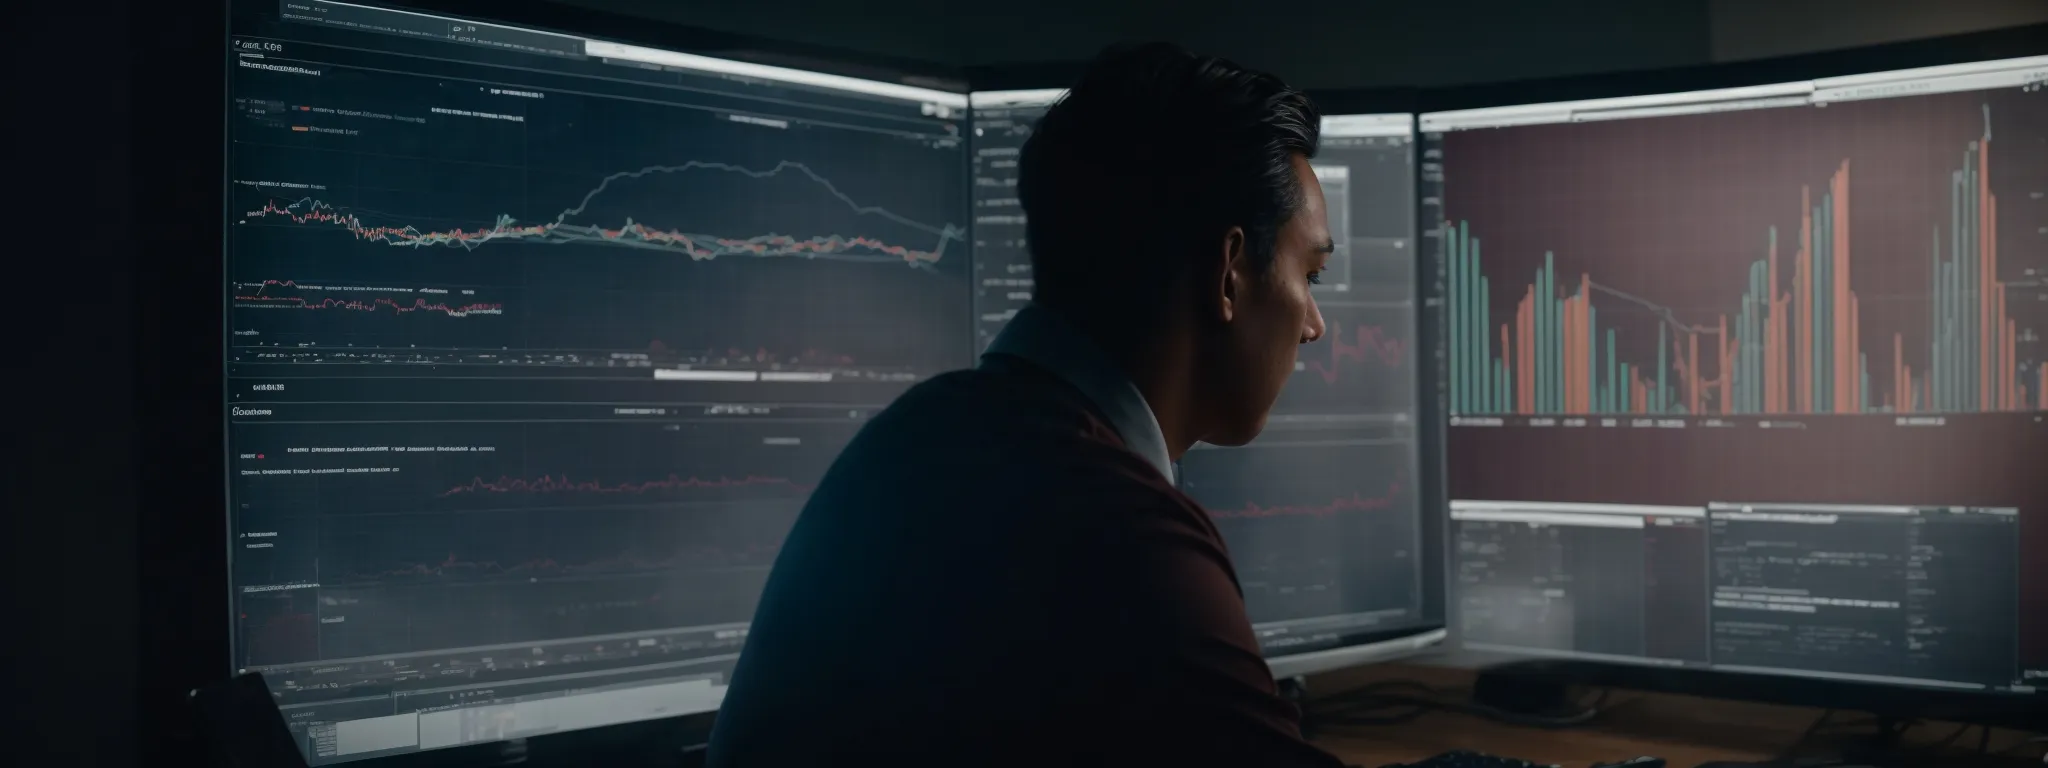 a marketer analyzing complex data visualizations on a computer dashboard reflecting ad campaign performances.